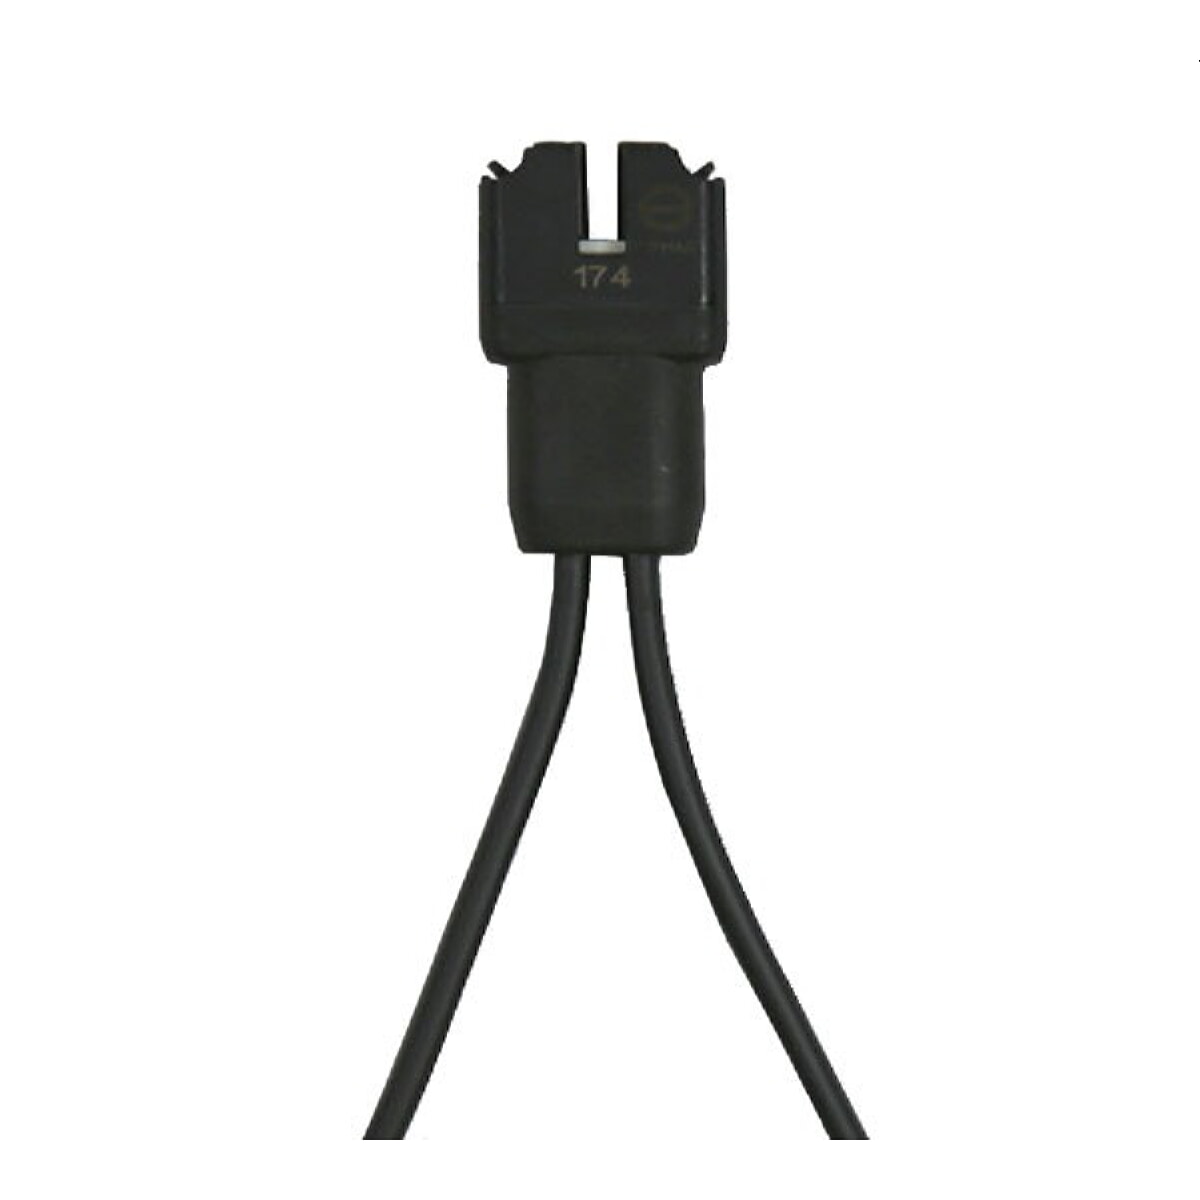 Enphase Q-25-17, AC cable for micro inverter 1-phase